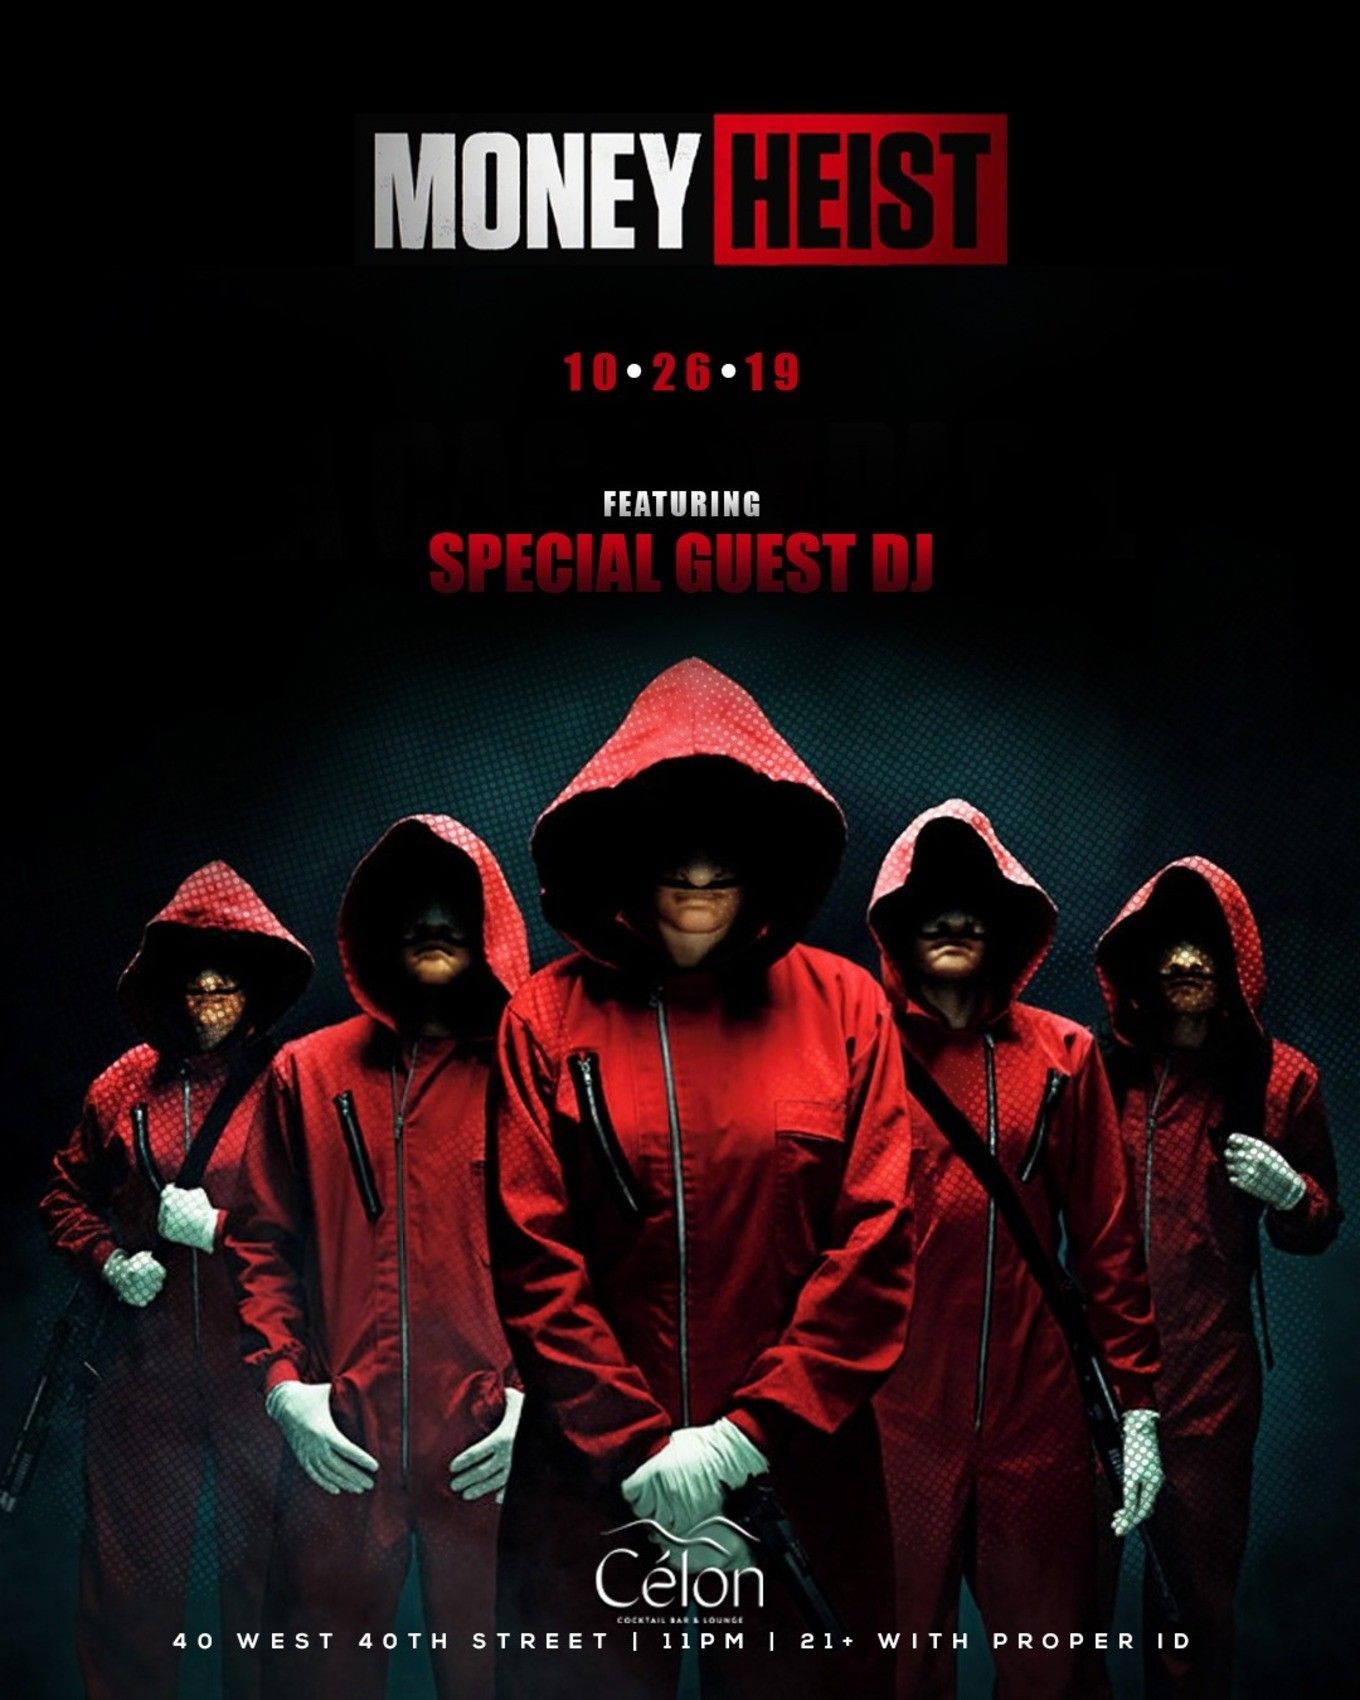 Money Heist themed event at Célon Nightclub in New York City. The poster features the five main characters from the show wearing red jumpsuits and masks. - Netflix